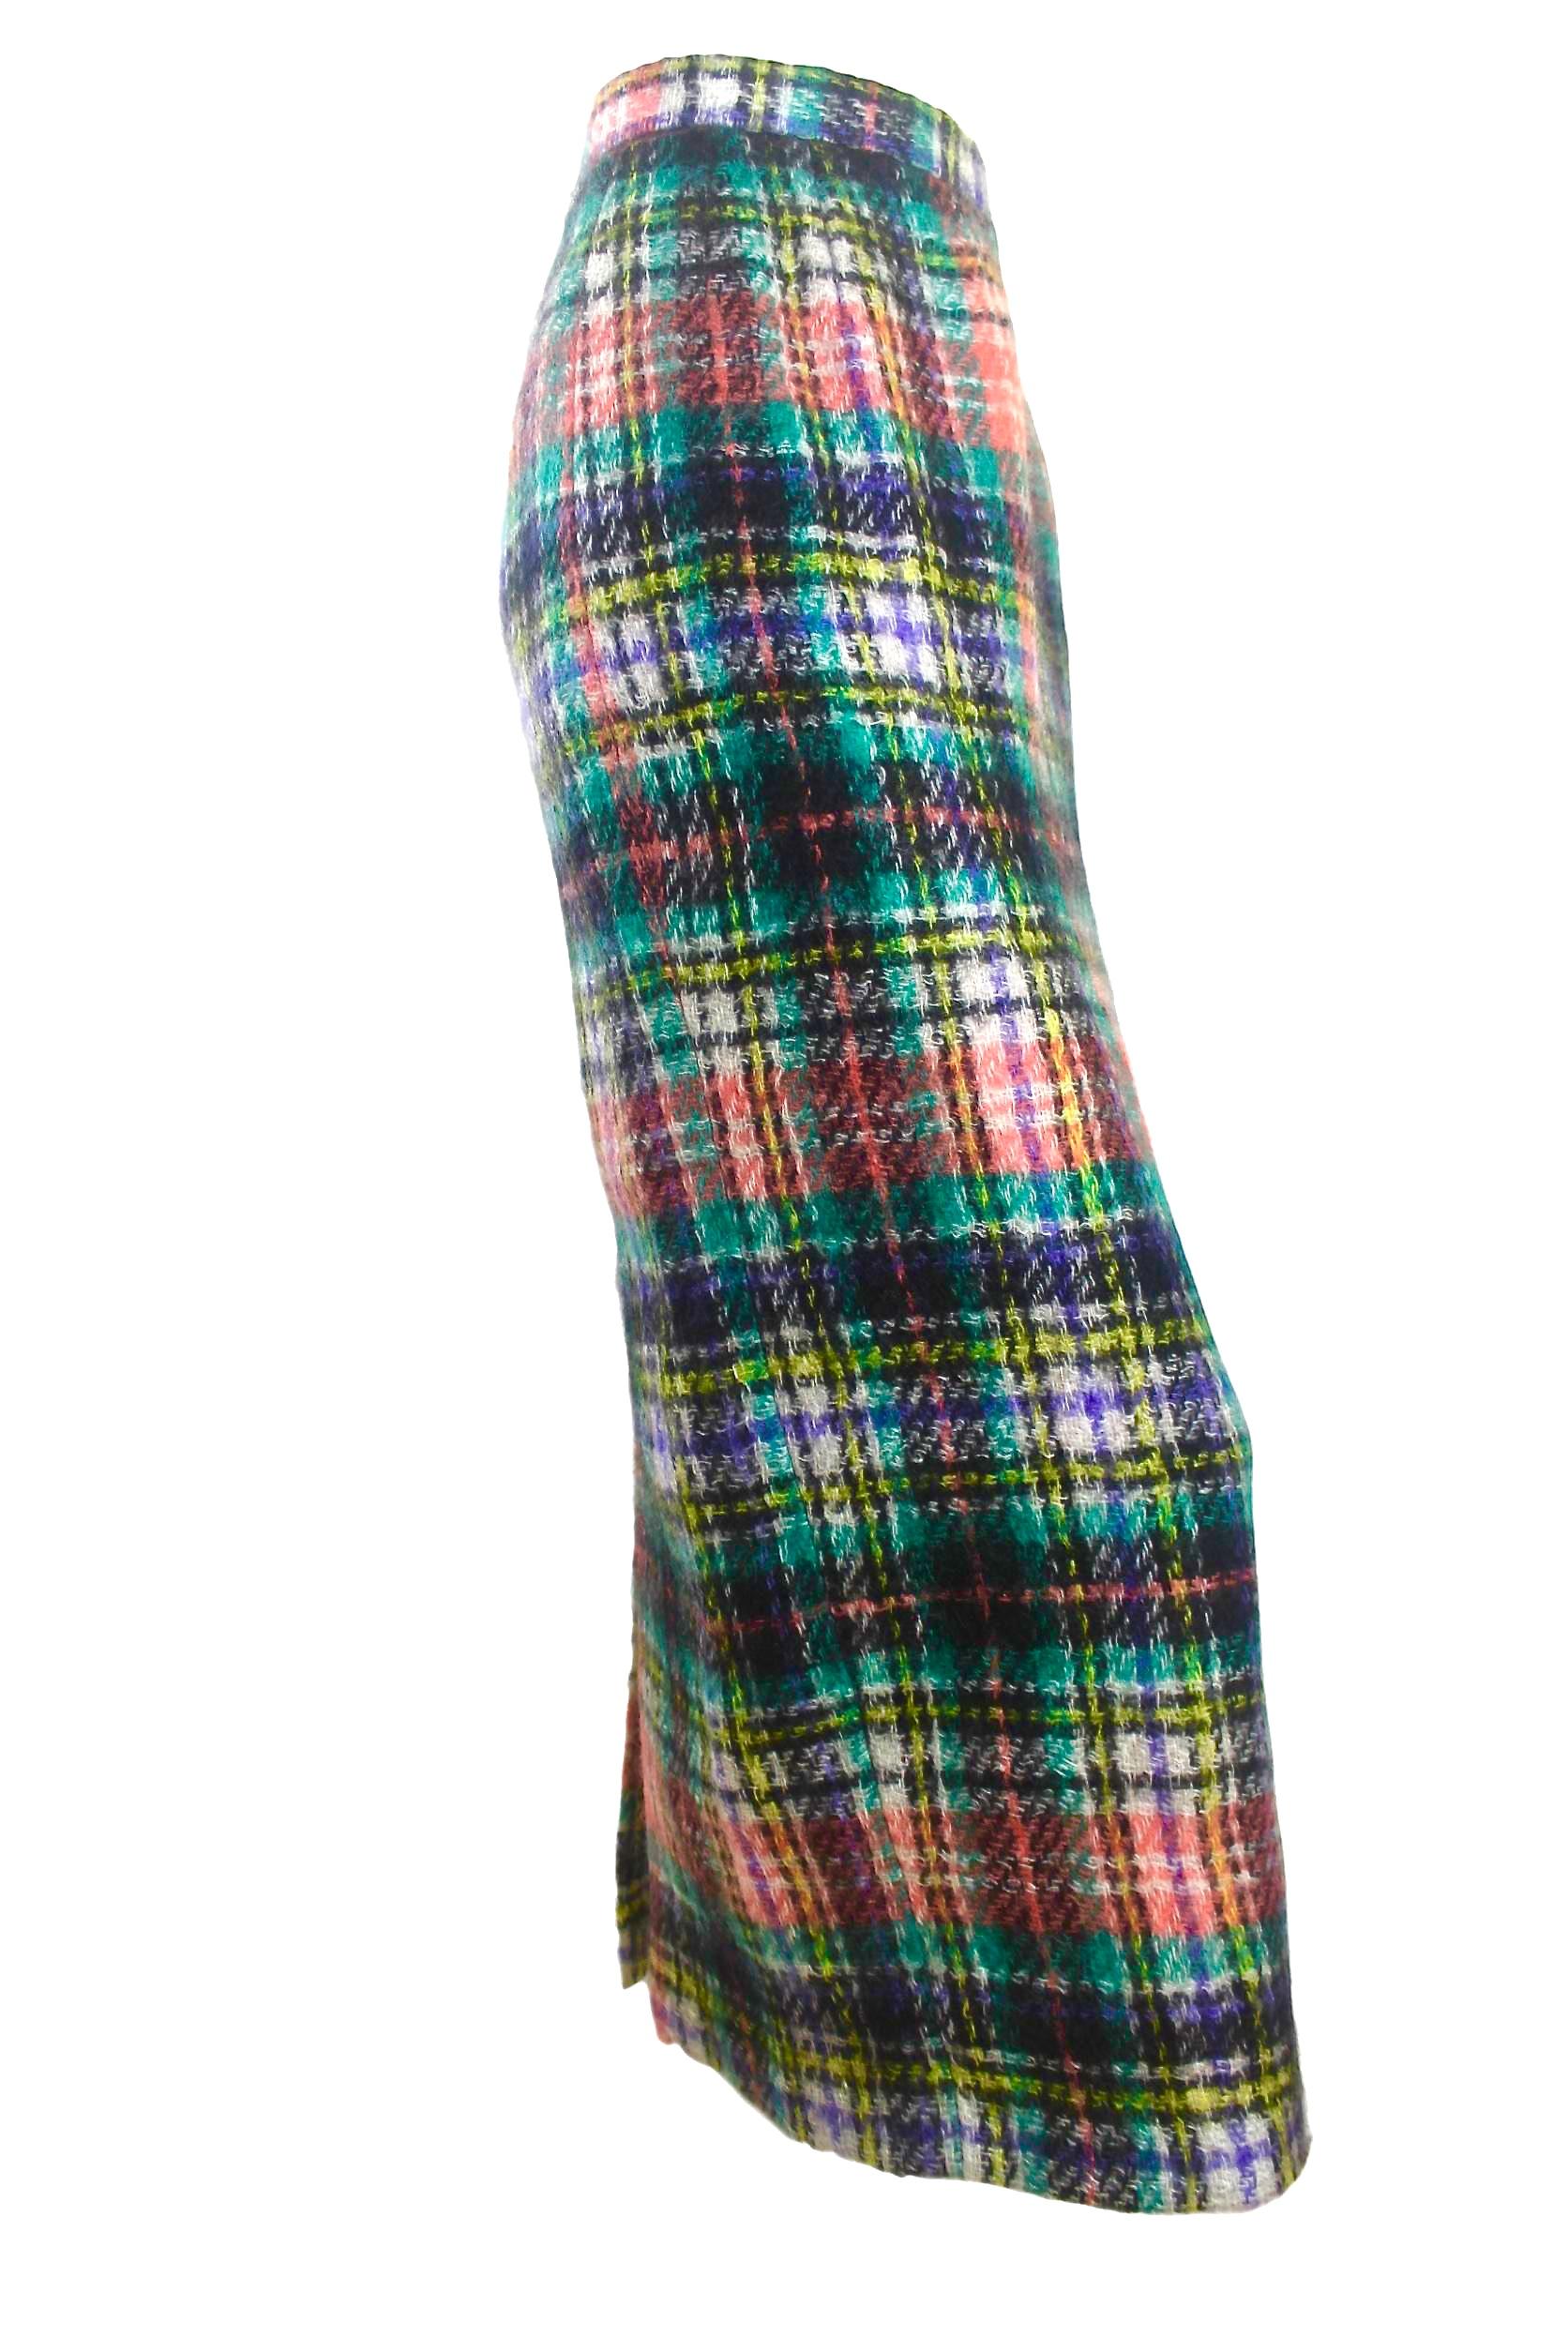 Comme des Garcons Junya Watanabe 1999 Collection Plaid Mohair Skirt In Excellent Condition For Sale In Bath, GB